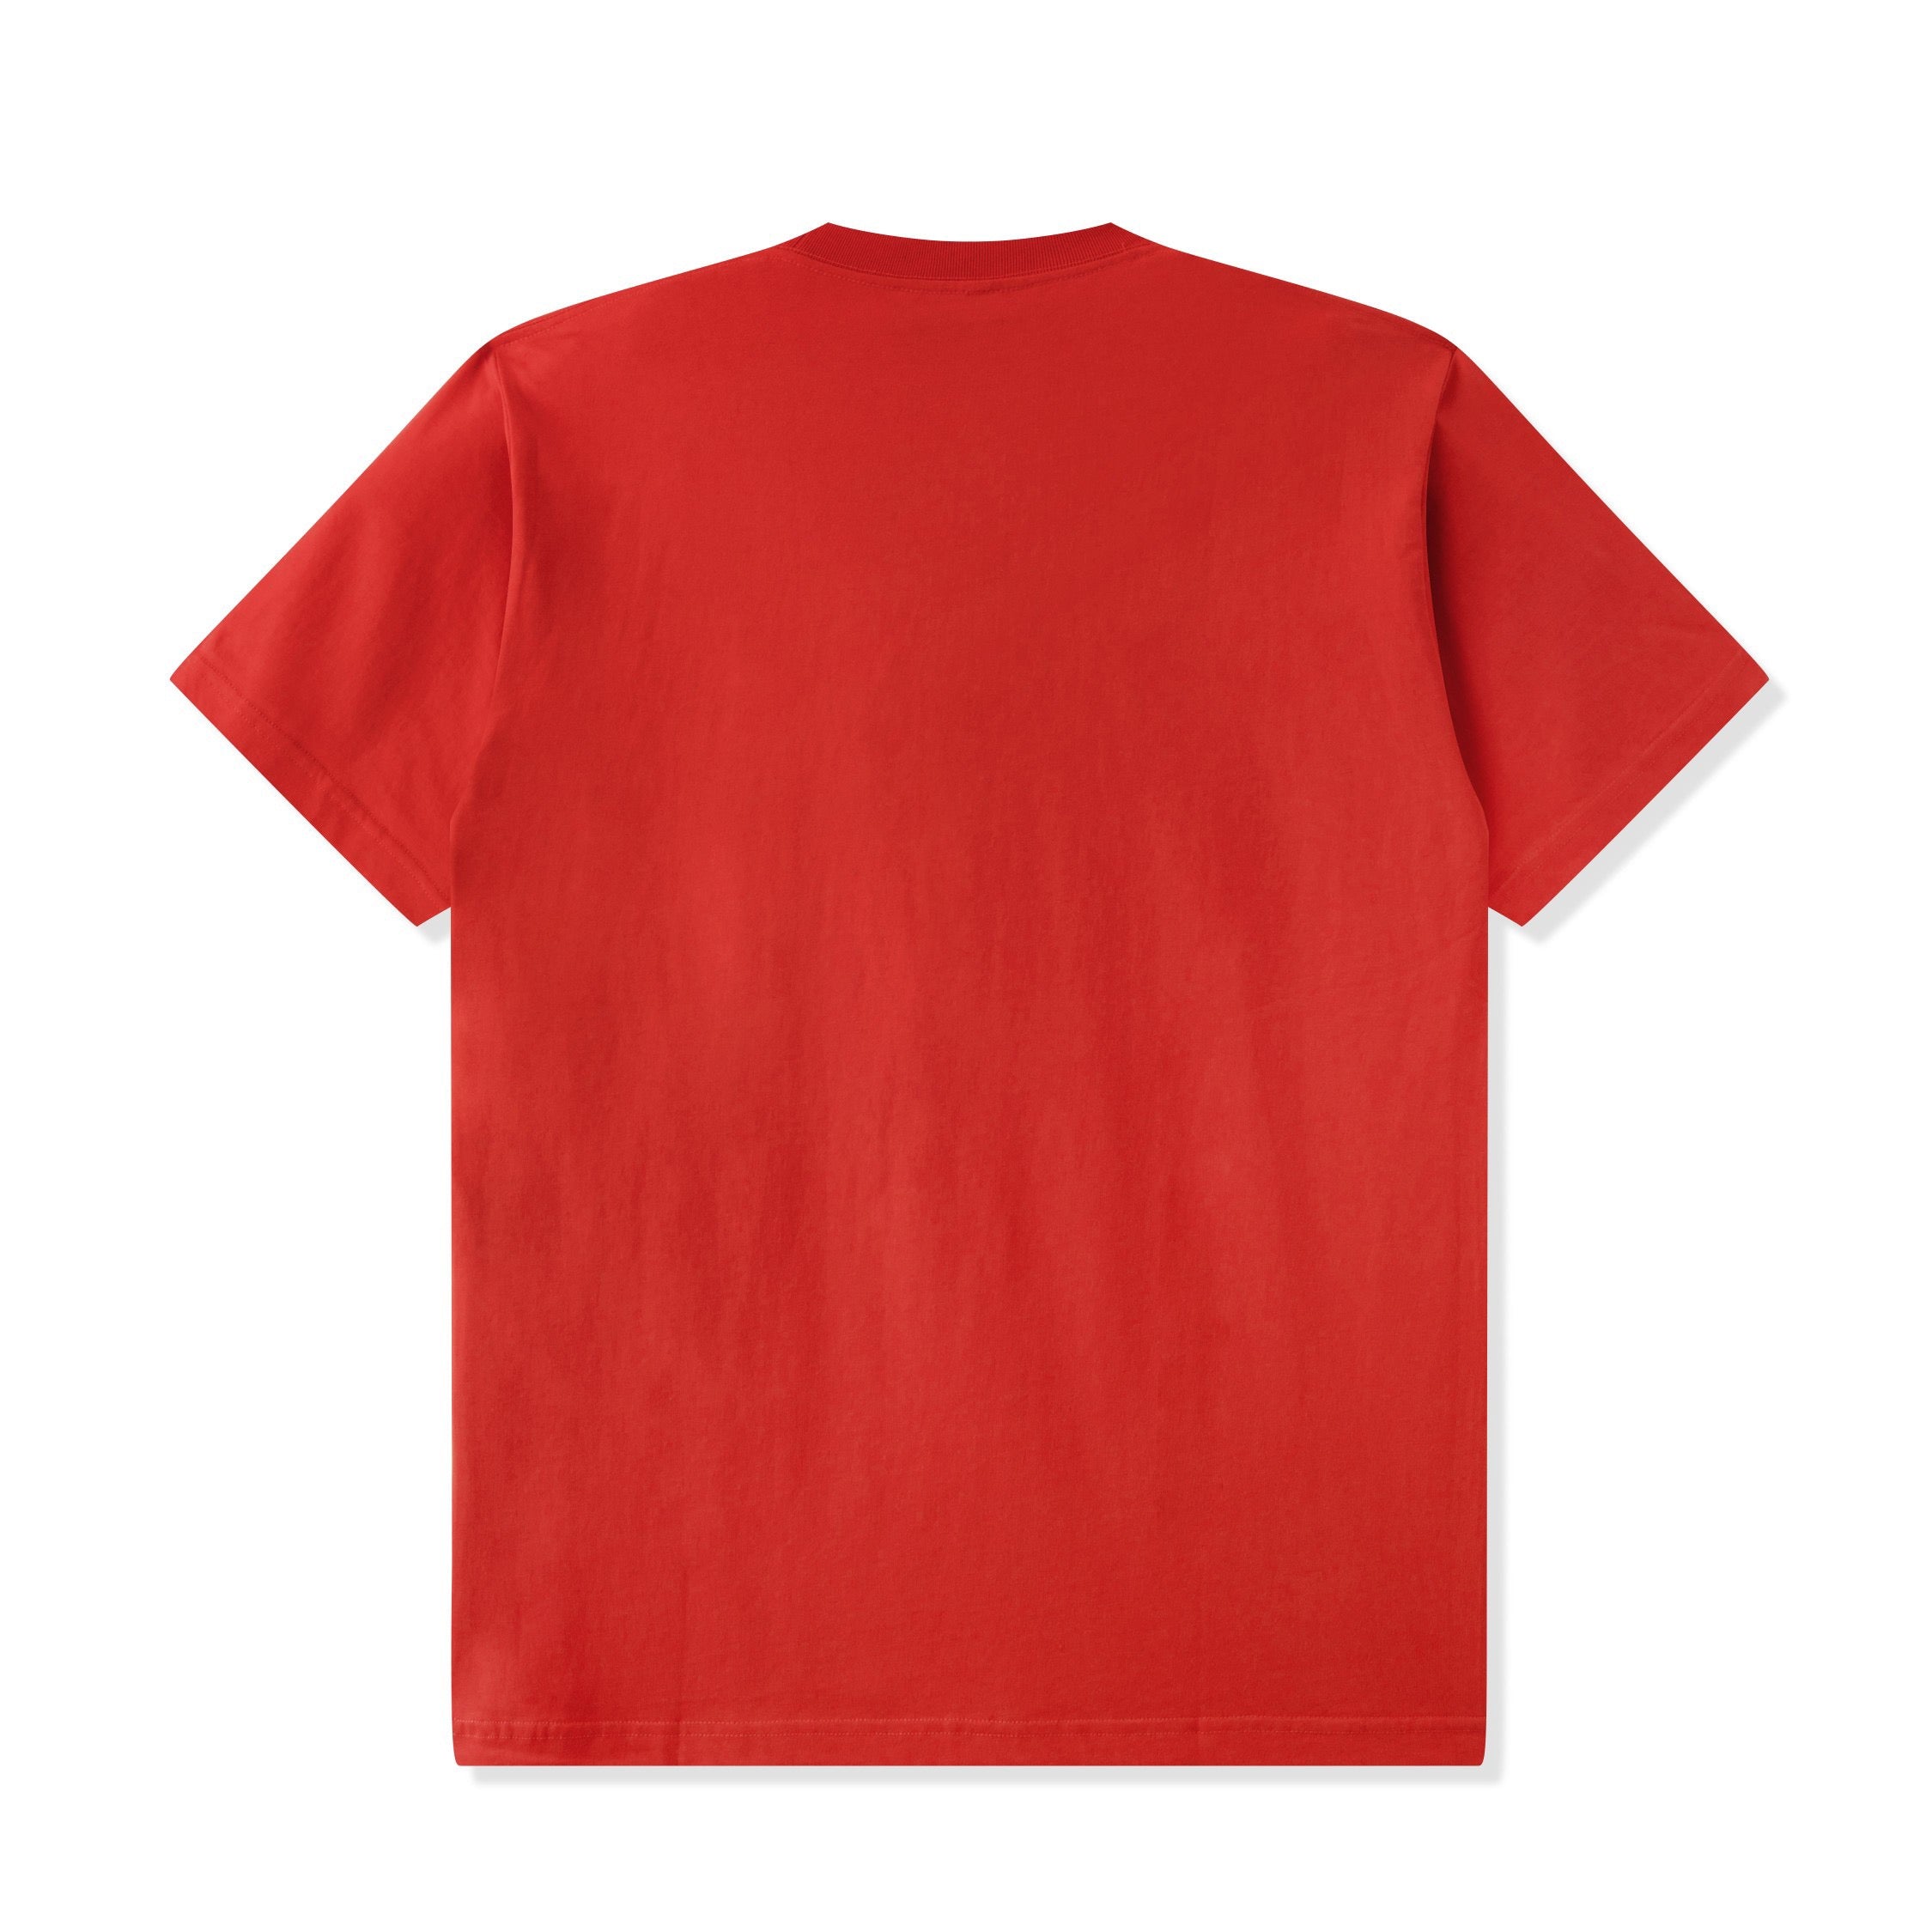 Black,Gry and Red T-shirt